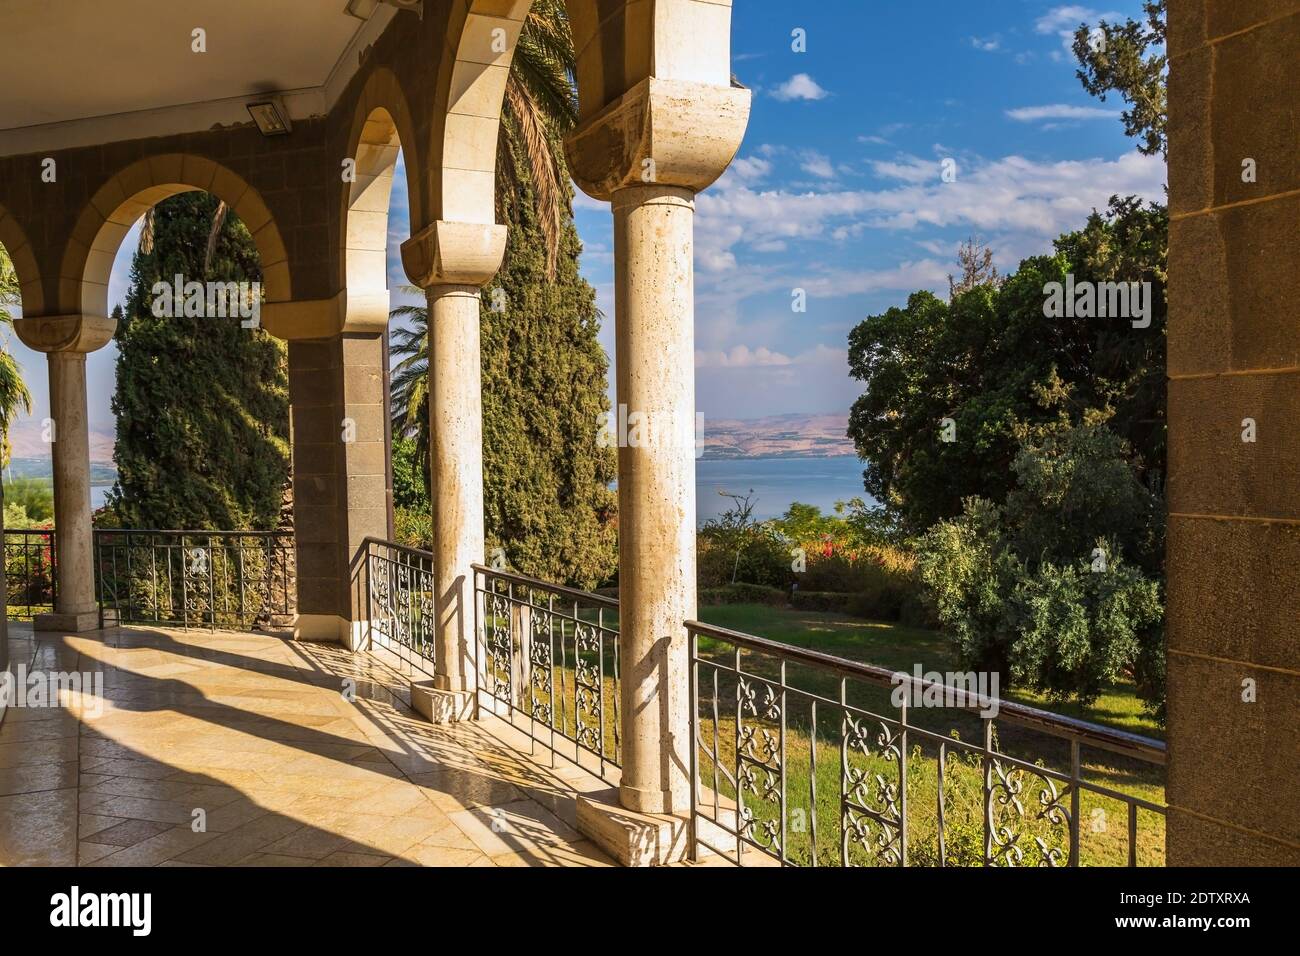 Columns and architectural details on the Church of the Beatitudes on the Mount of Beatitudes, Sea of Galilee region, Israel Stock Photo